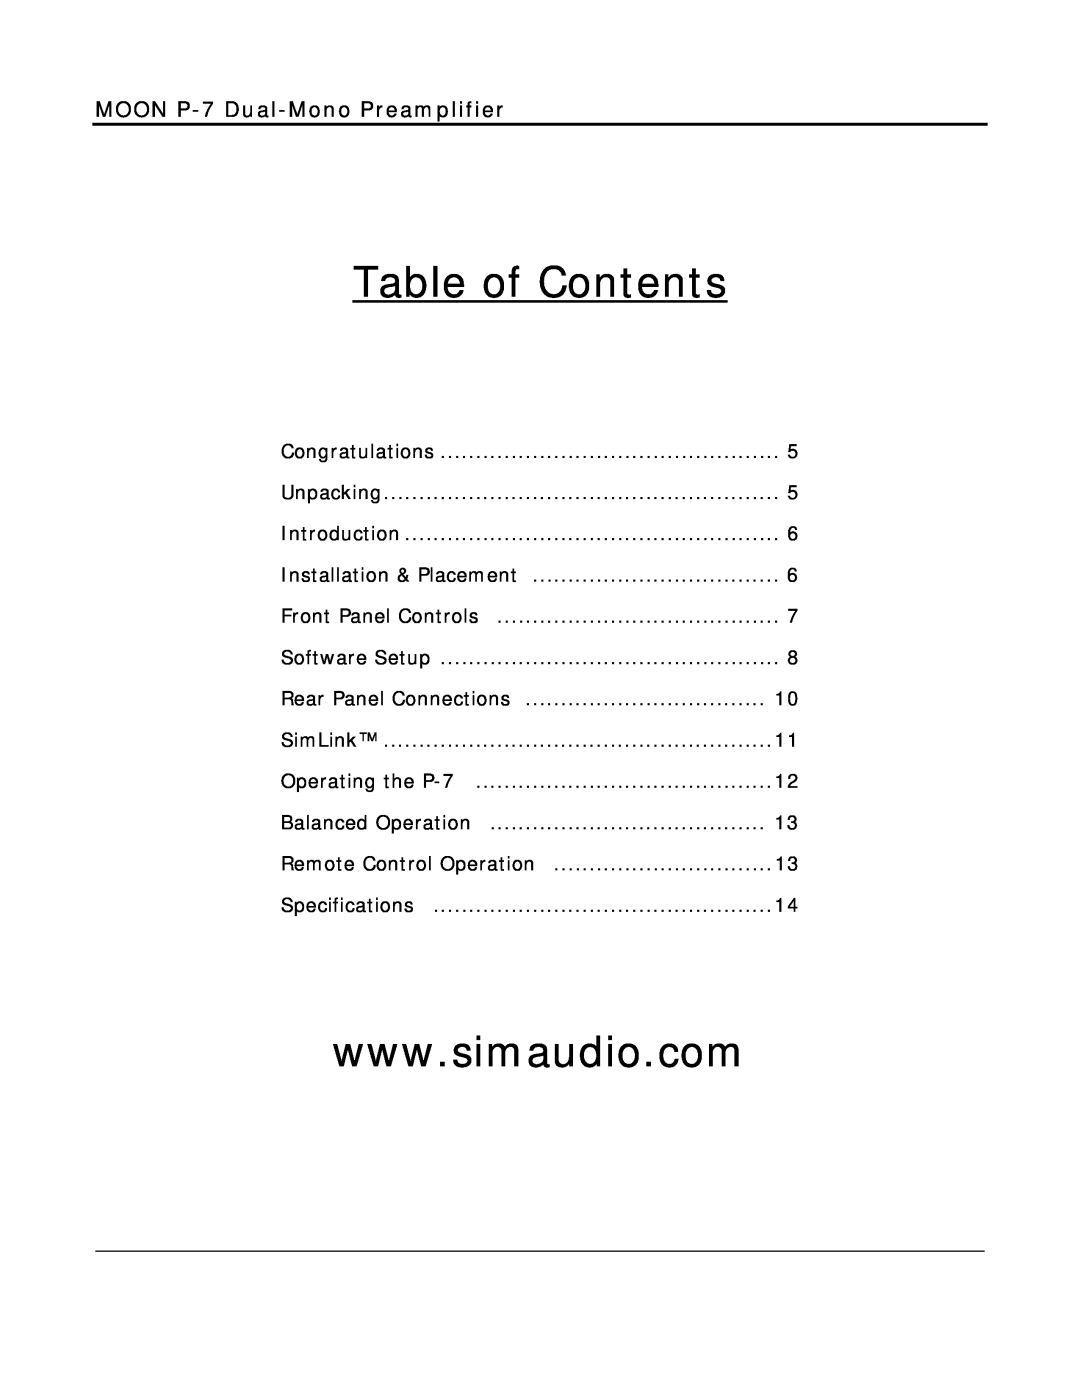 Simaudio owner manual Table of Contents, MOON P-7 Dual-MonoPreamplifier 